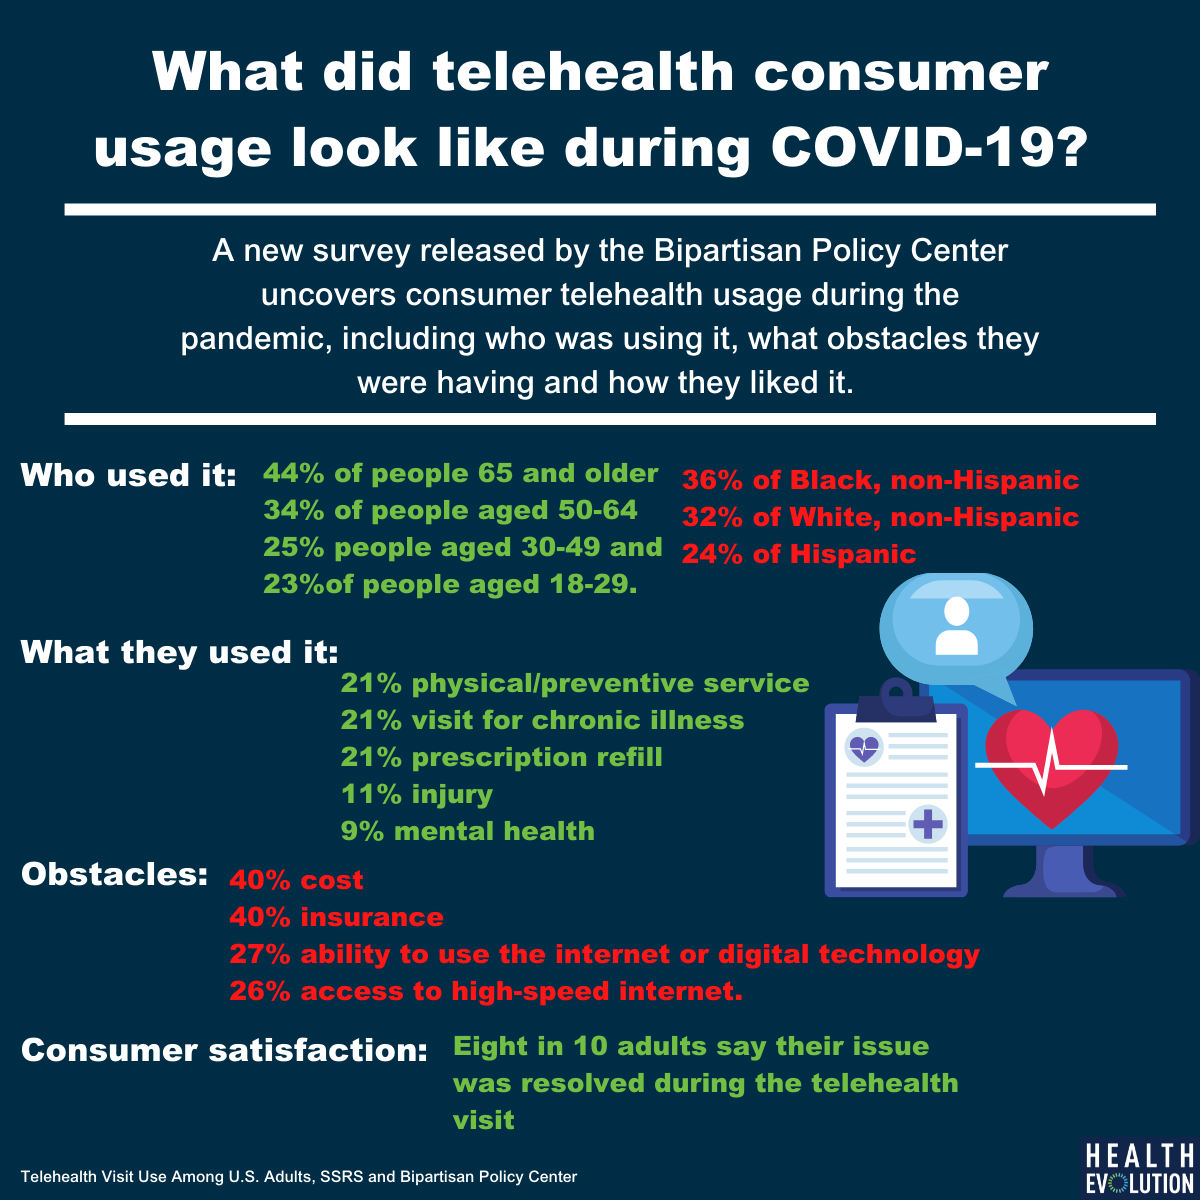 Data Dive: What did telehealth consumer usage look like during the first year of COVID-19?